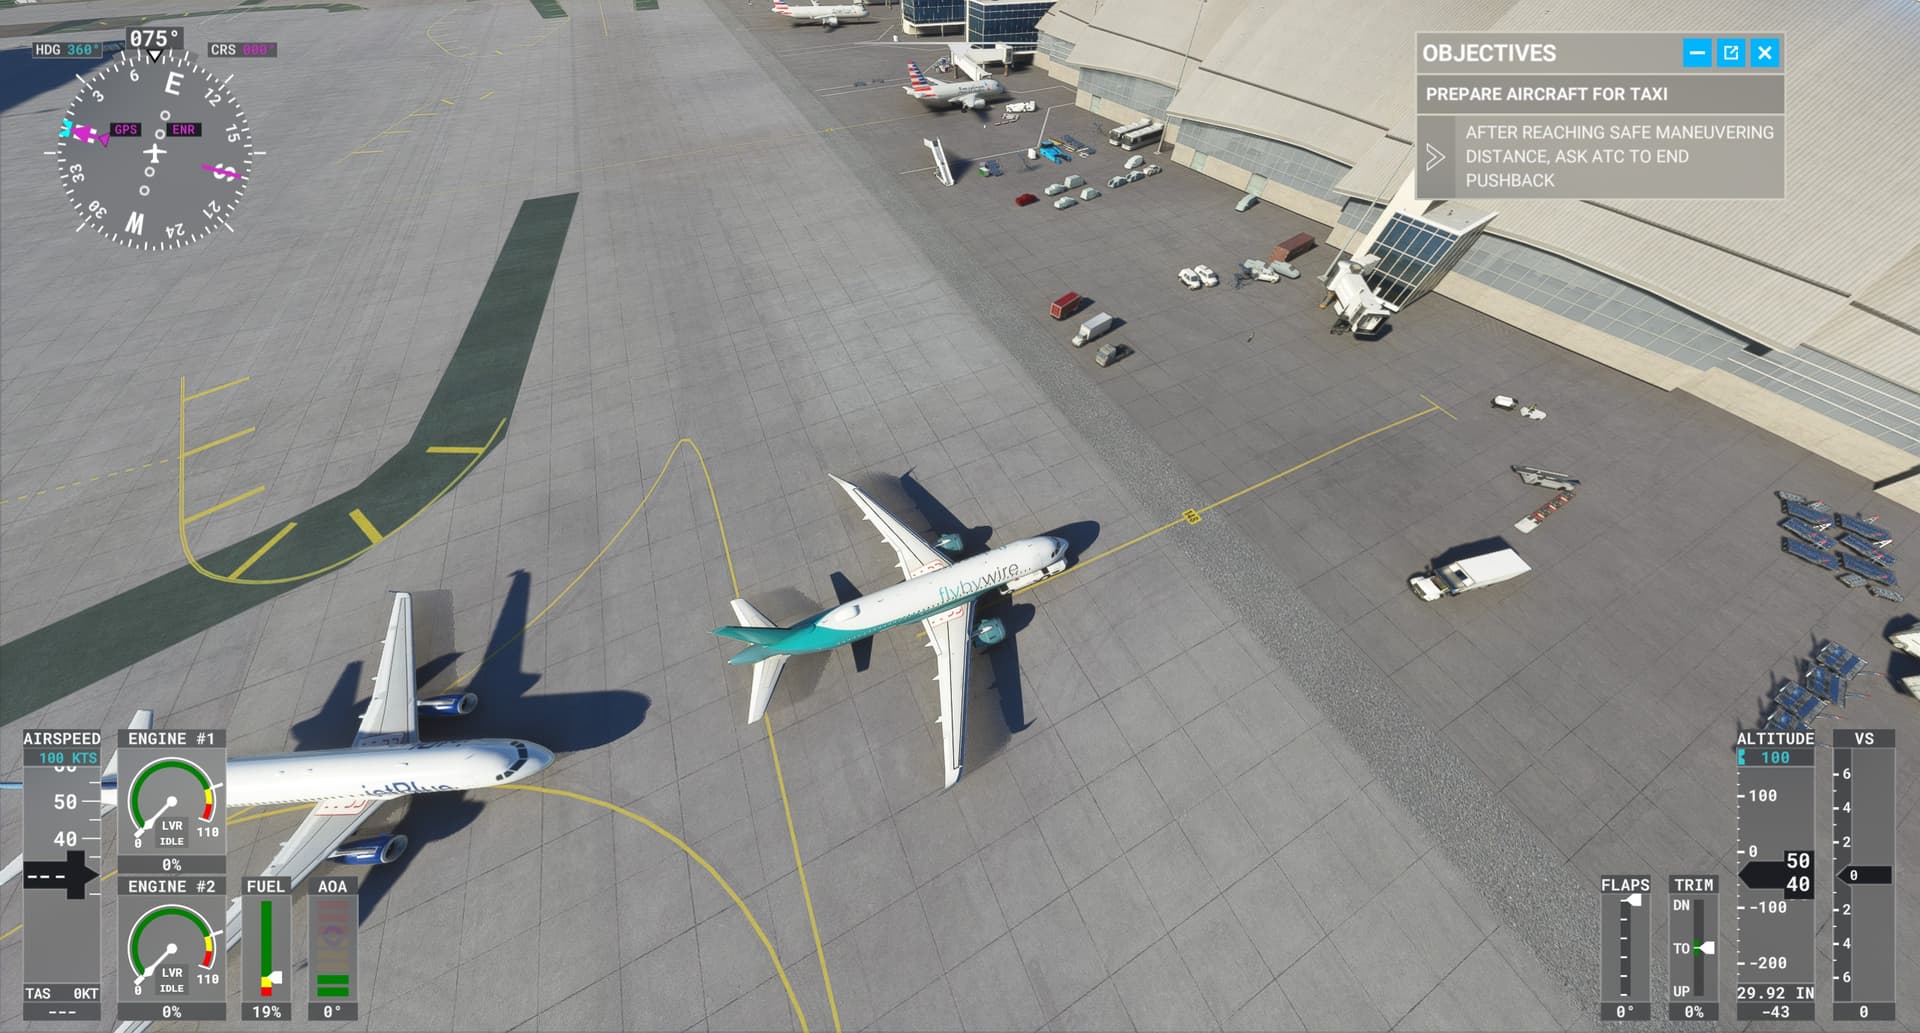 Missing and mislabeled taxiways at LAX - Scenery and Airports ...